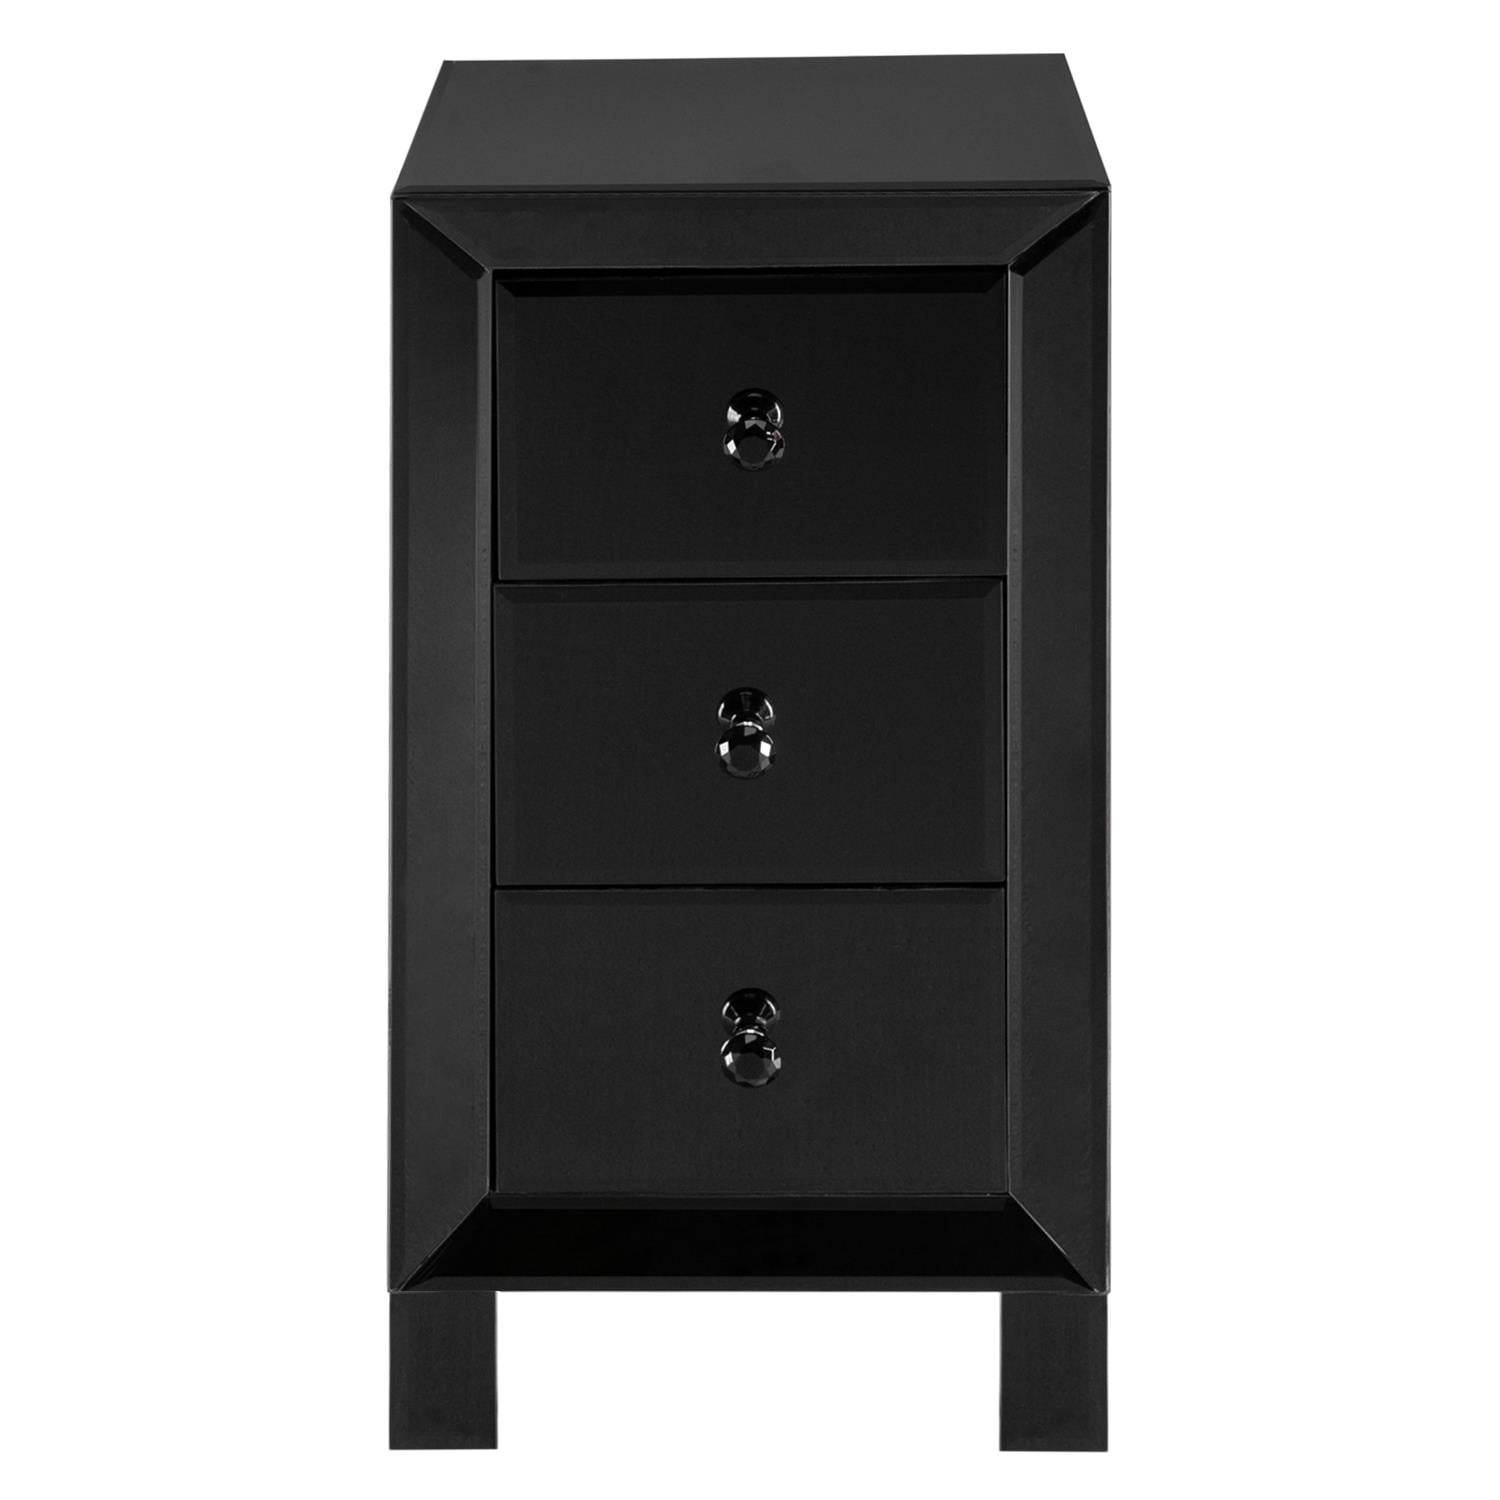 Ktaxon 3 Drawer Mirrored End Table, Black And Mirrored Bedside Table